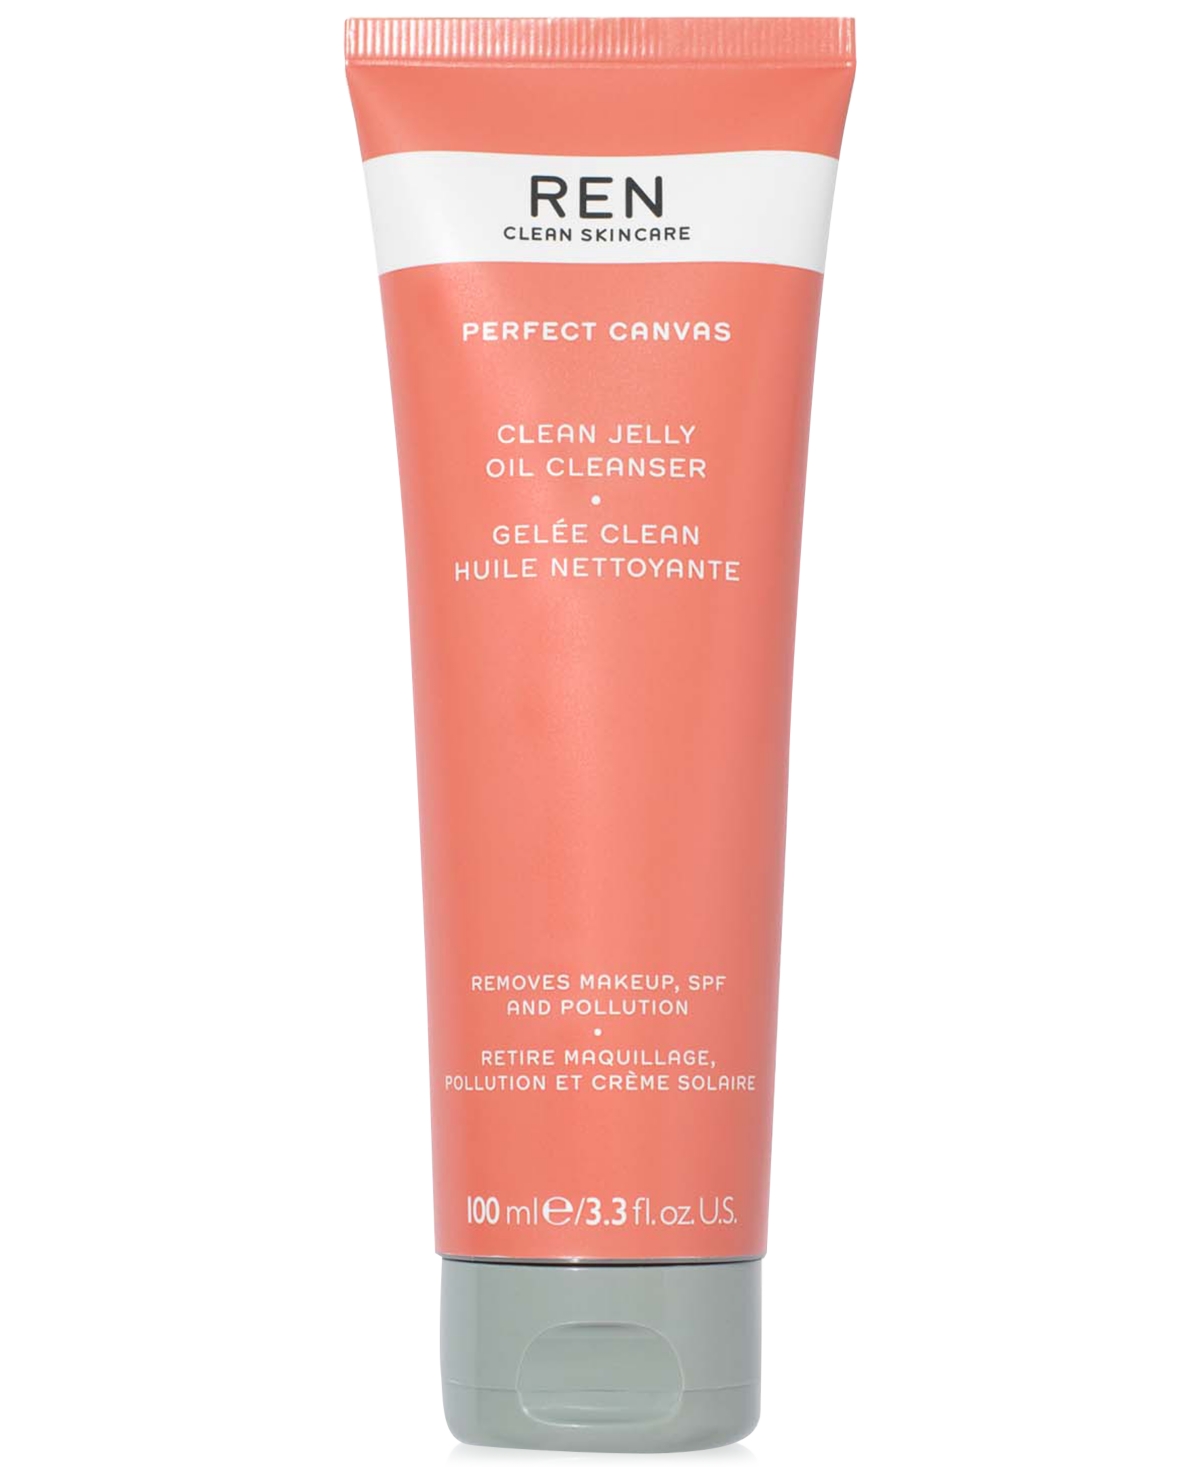 EAN 5056264701721 product image for Ren Clean Skincare Perfect Canvas Clean Jelly Oil Cleanser | upcitemdb.com